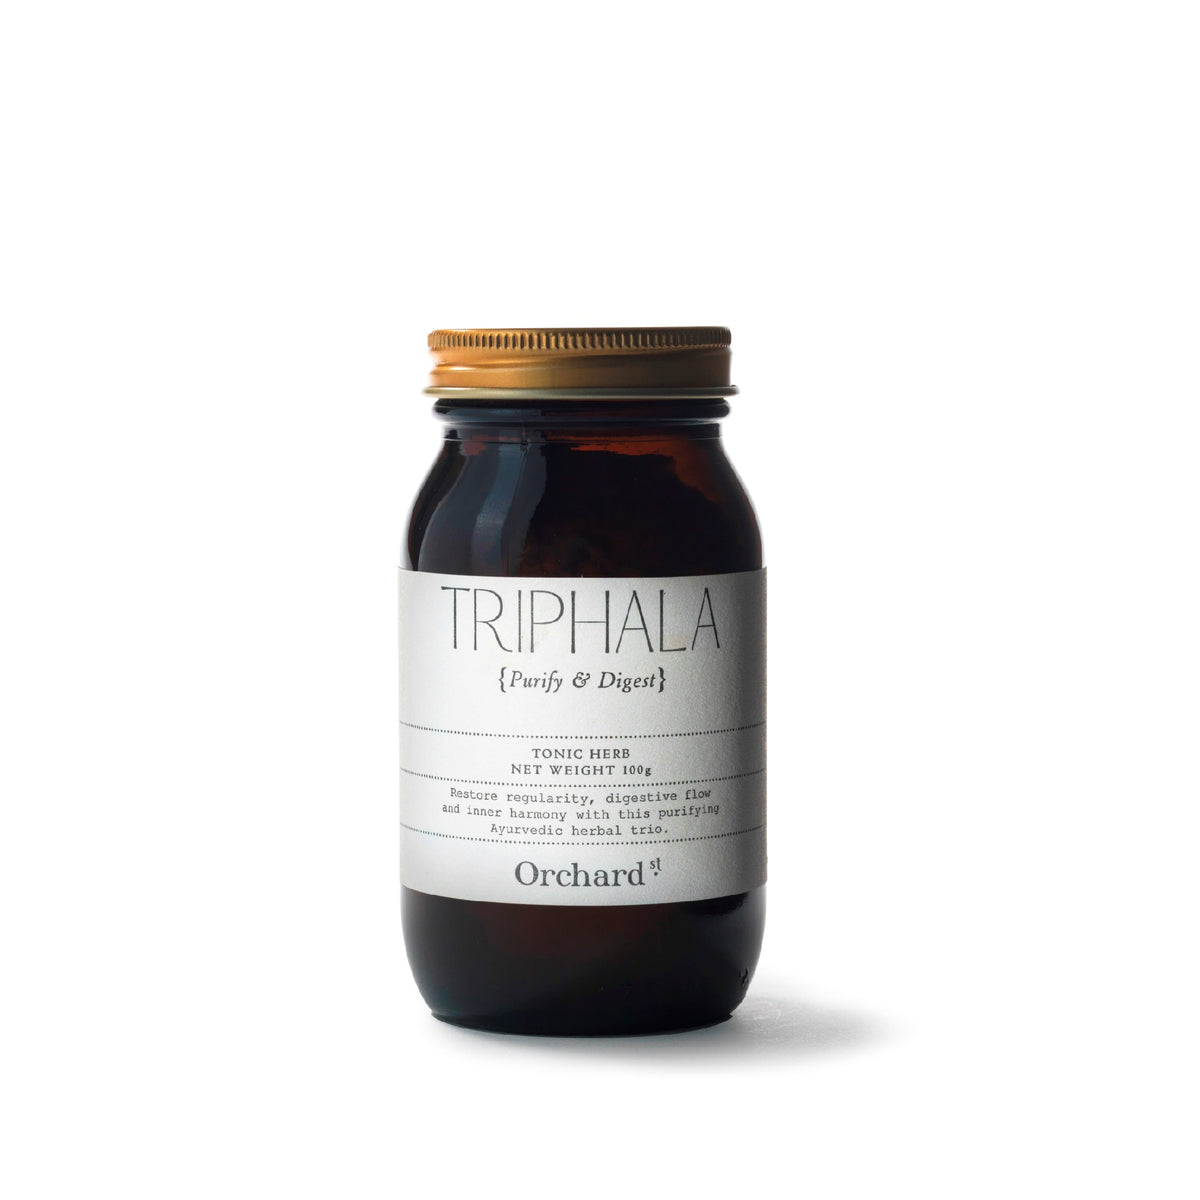 Triphala - Purify and Digest